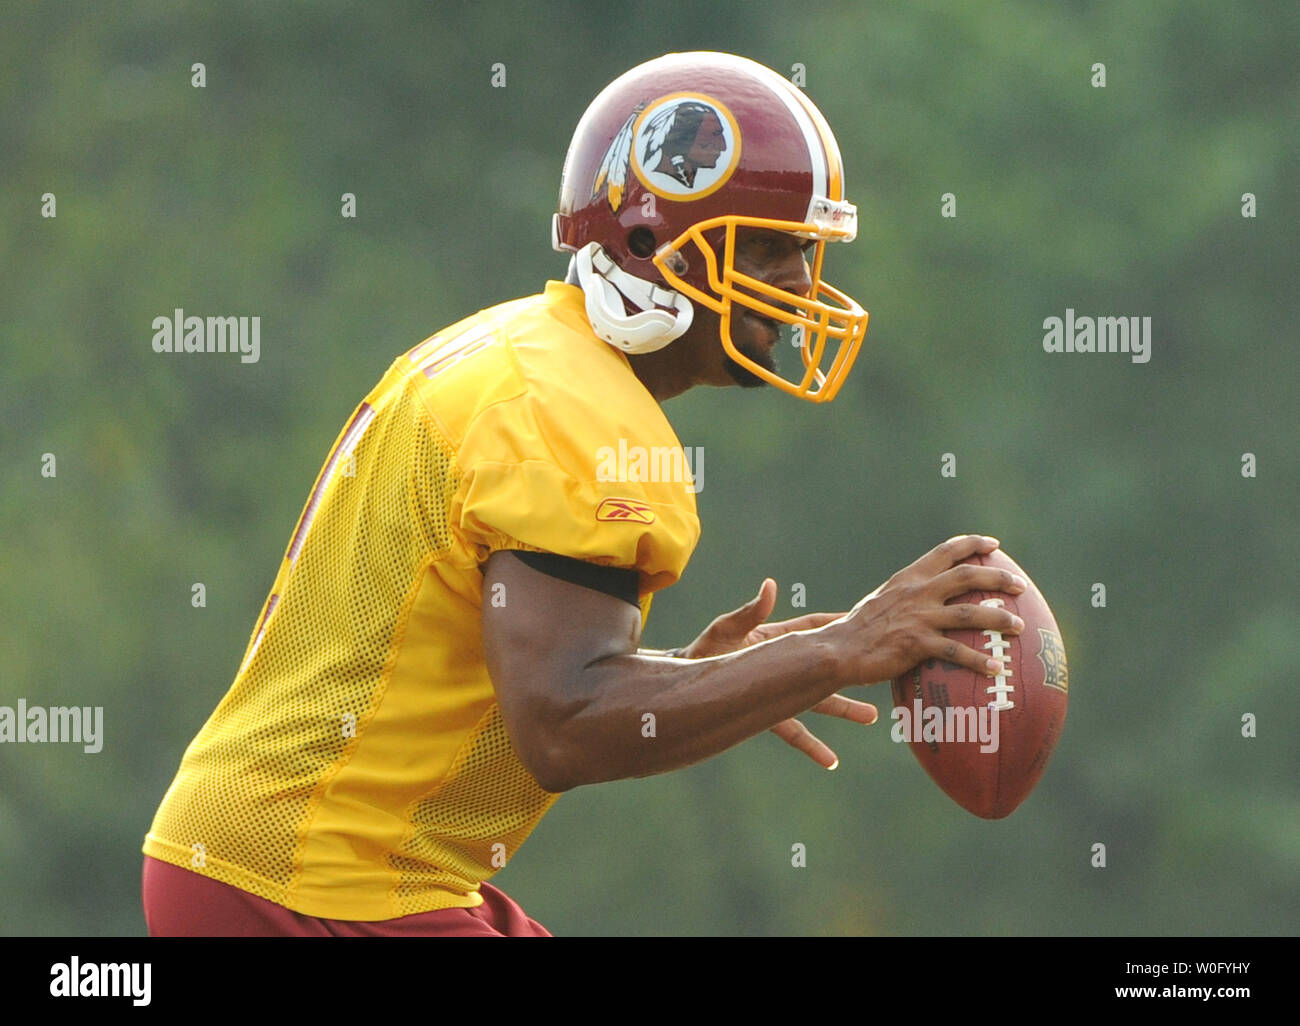 Washington Redskins quarterback Donovan McNabb drops back to pass during the last day of Redskins training camp at Redskins Park in Ashburn, Virginia, August 19, 2010. UPI/Kevin Dietsch Stock Photo